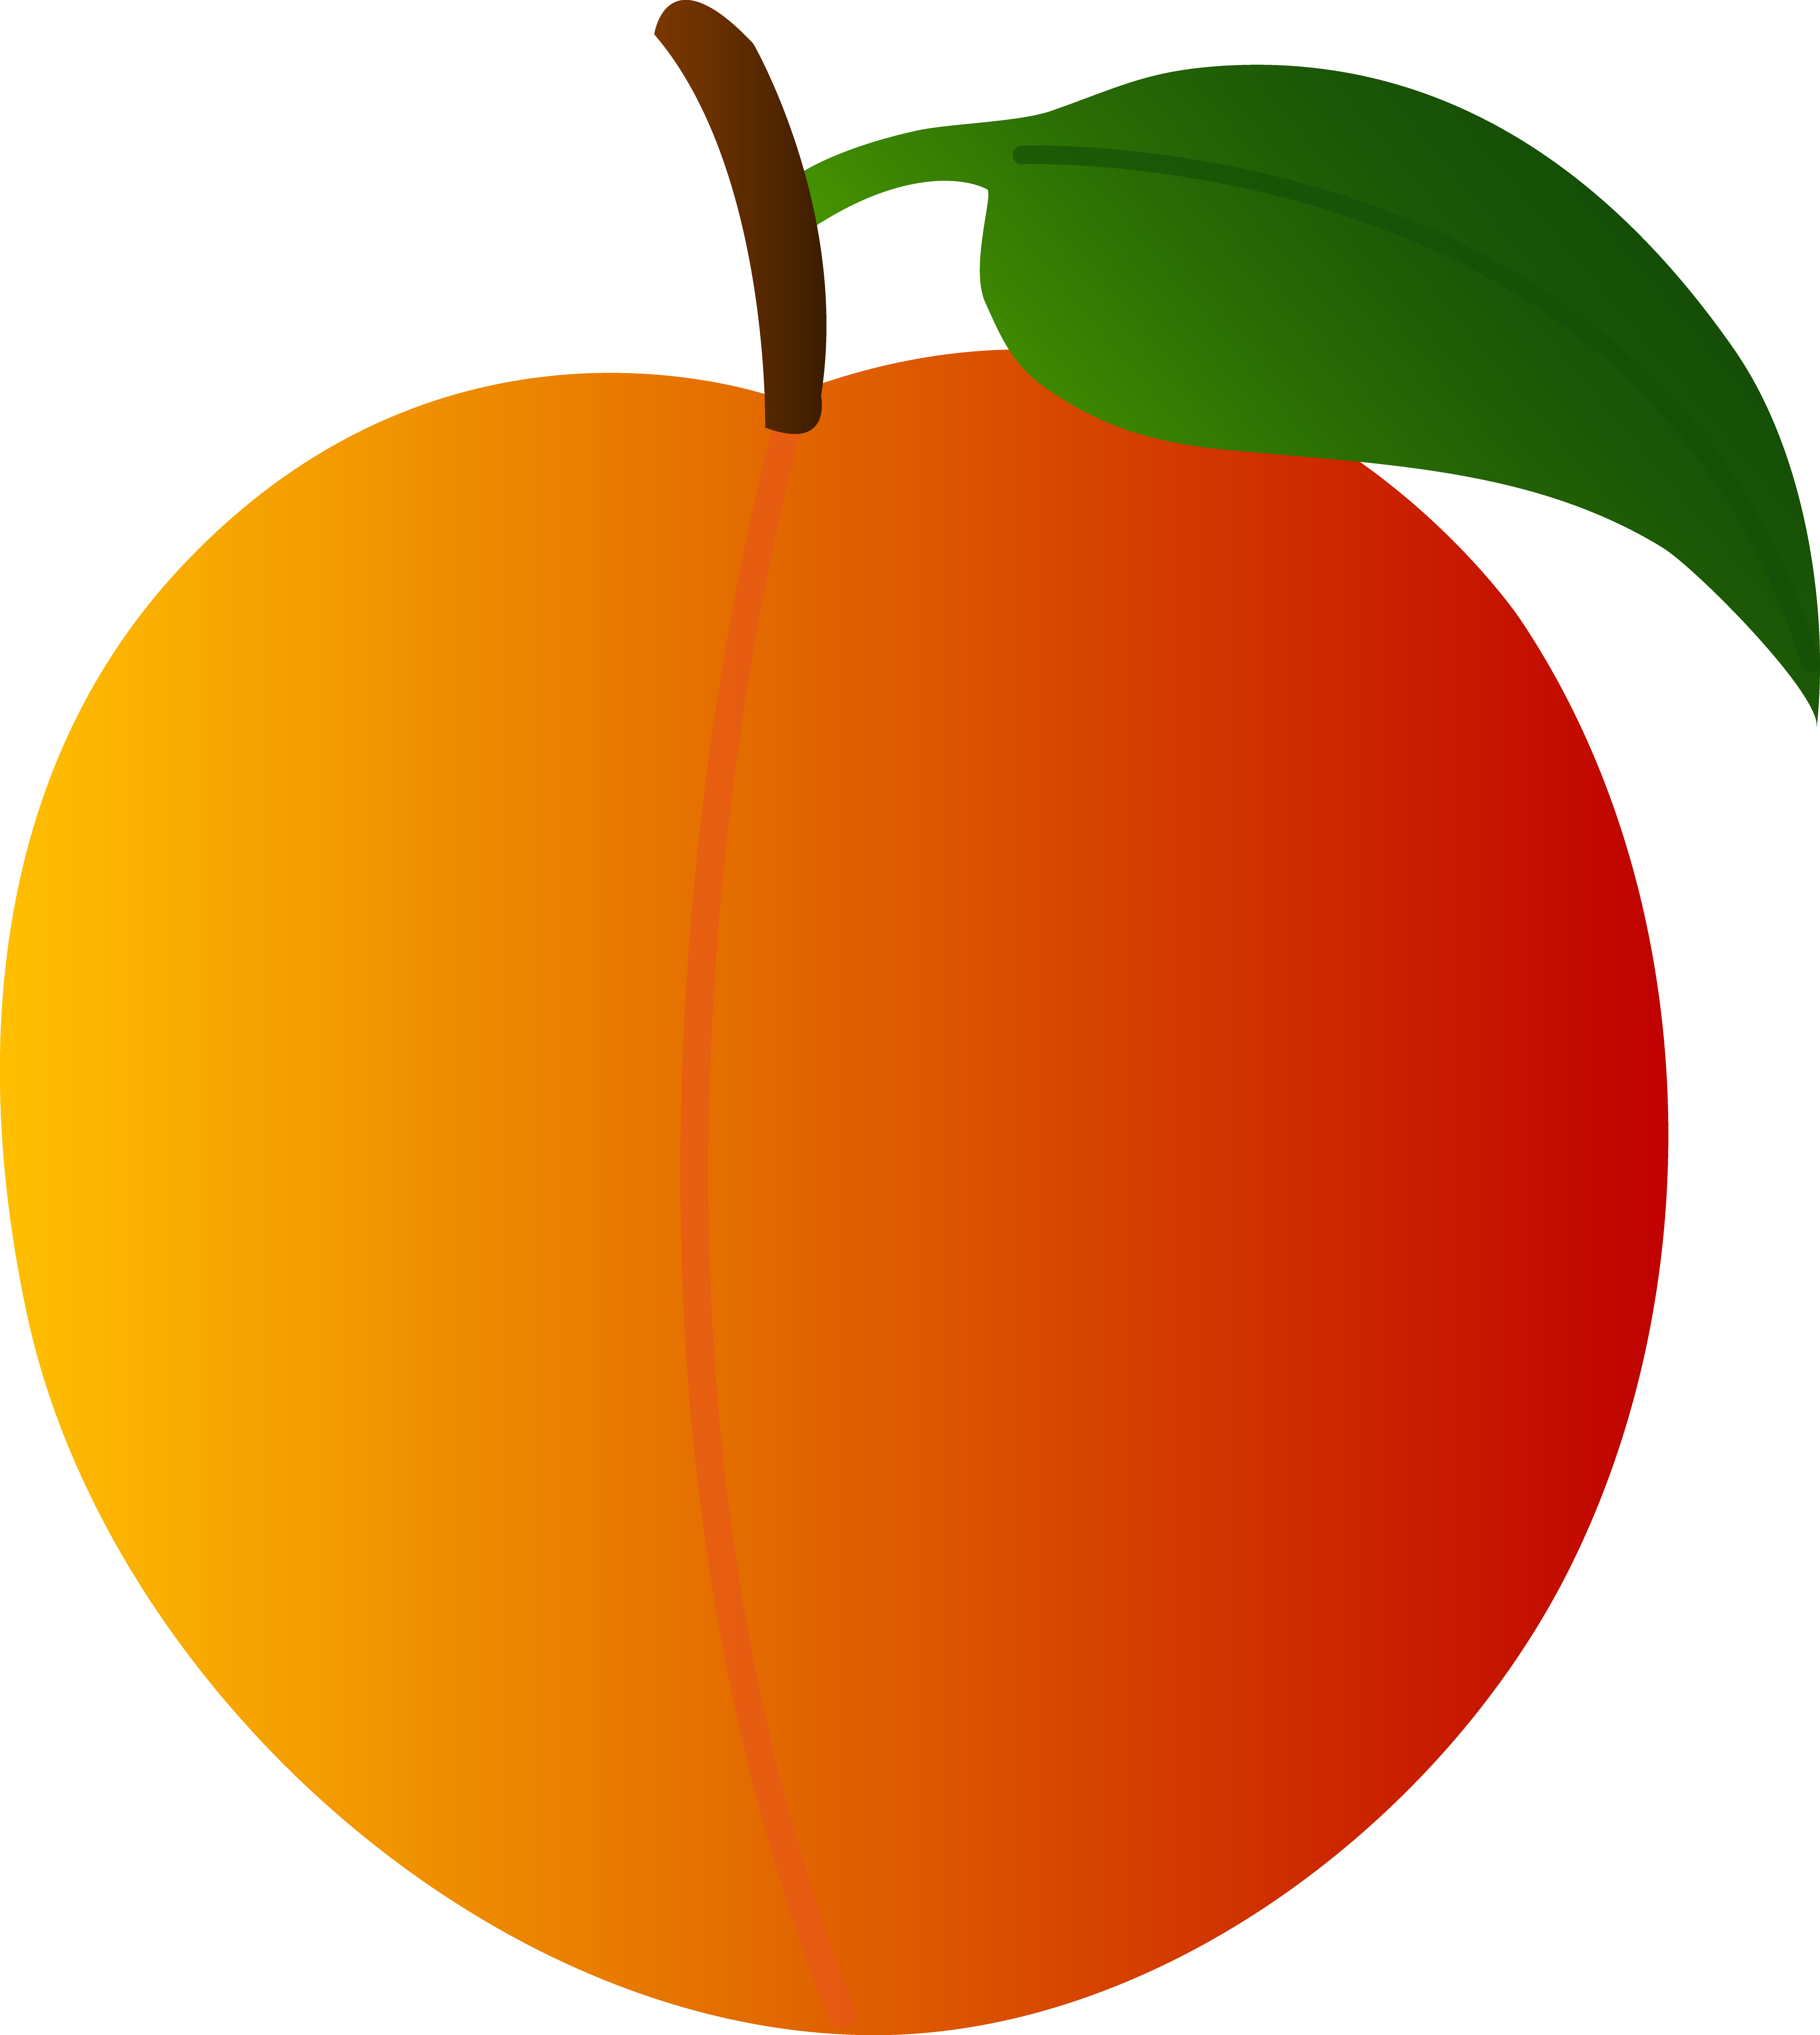 Peach clipart #5, Download drawings